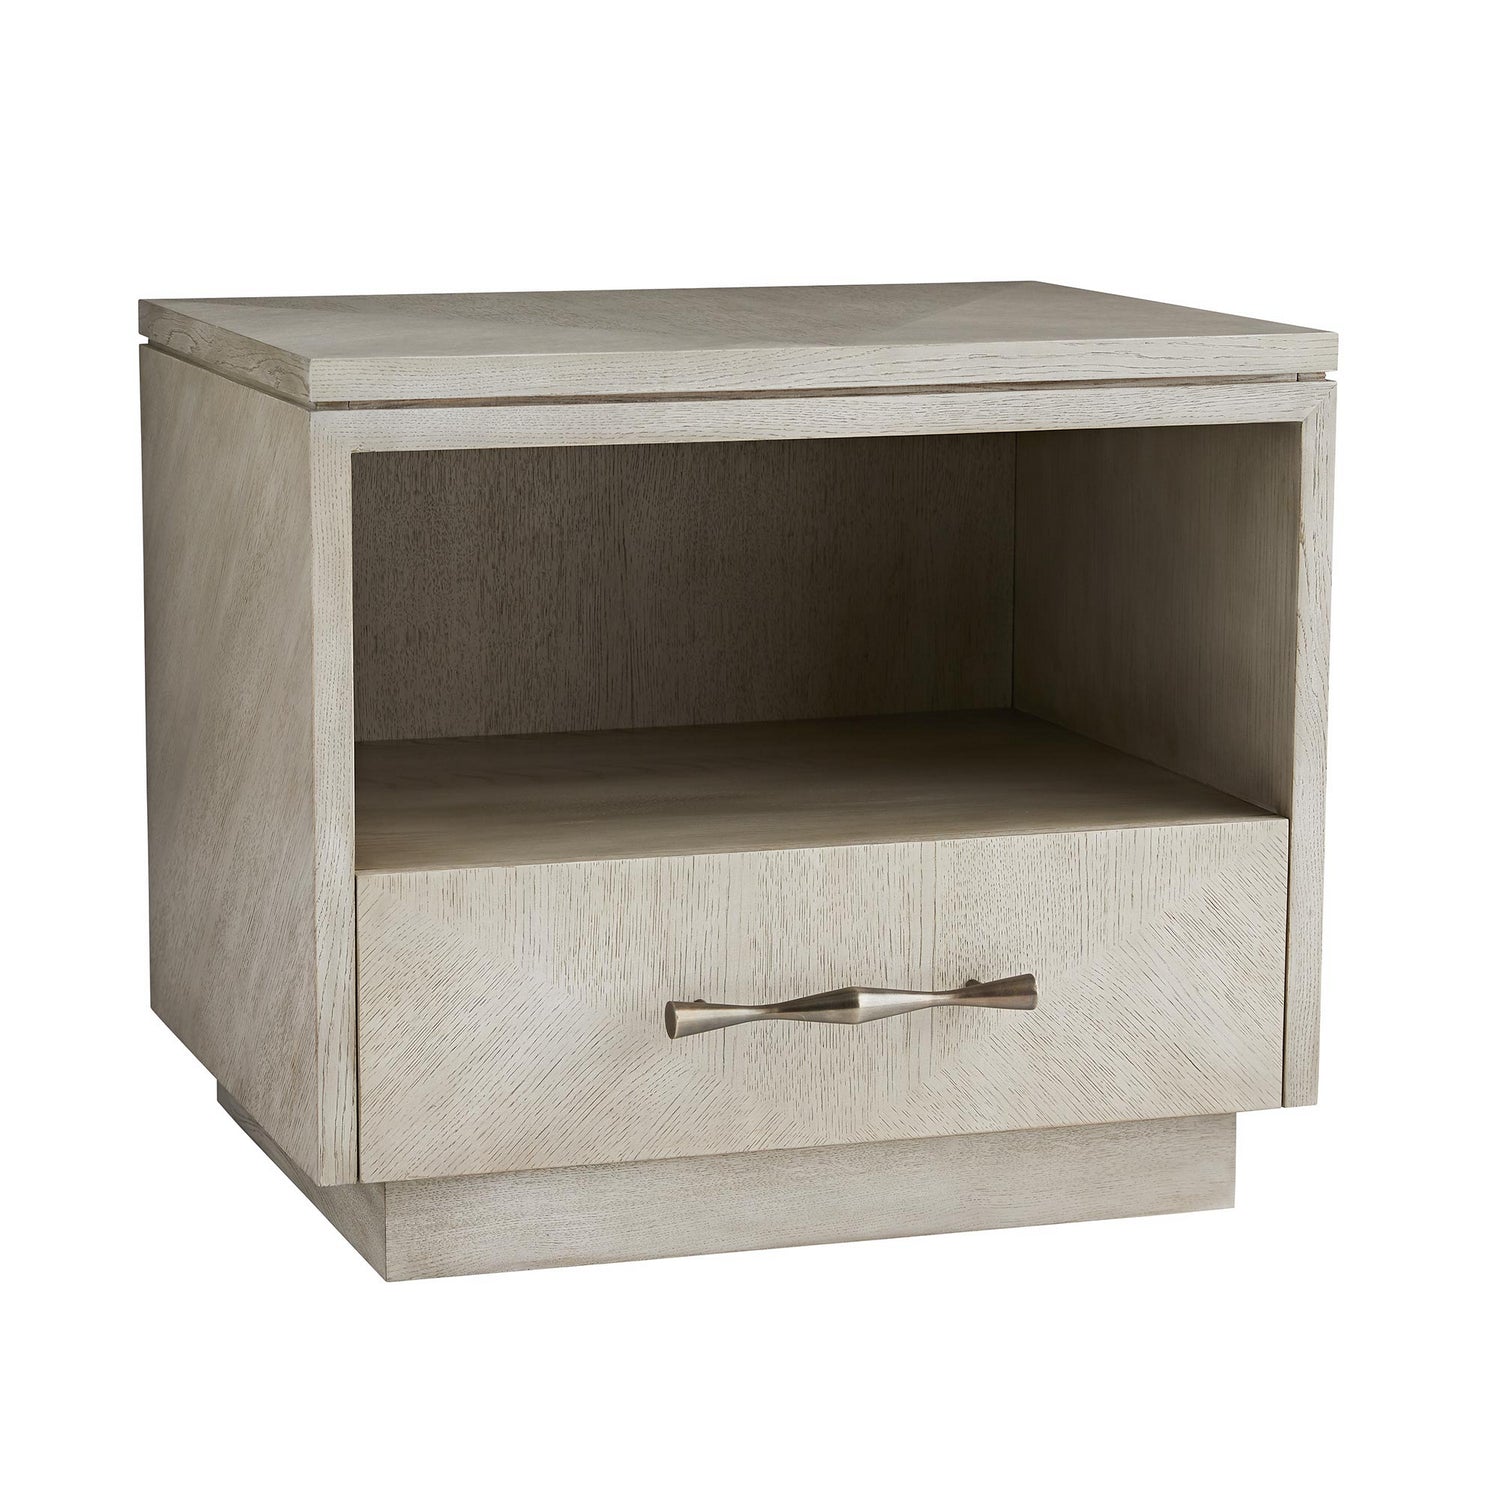 Side Table from the Mallory collection in Smoke finish